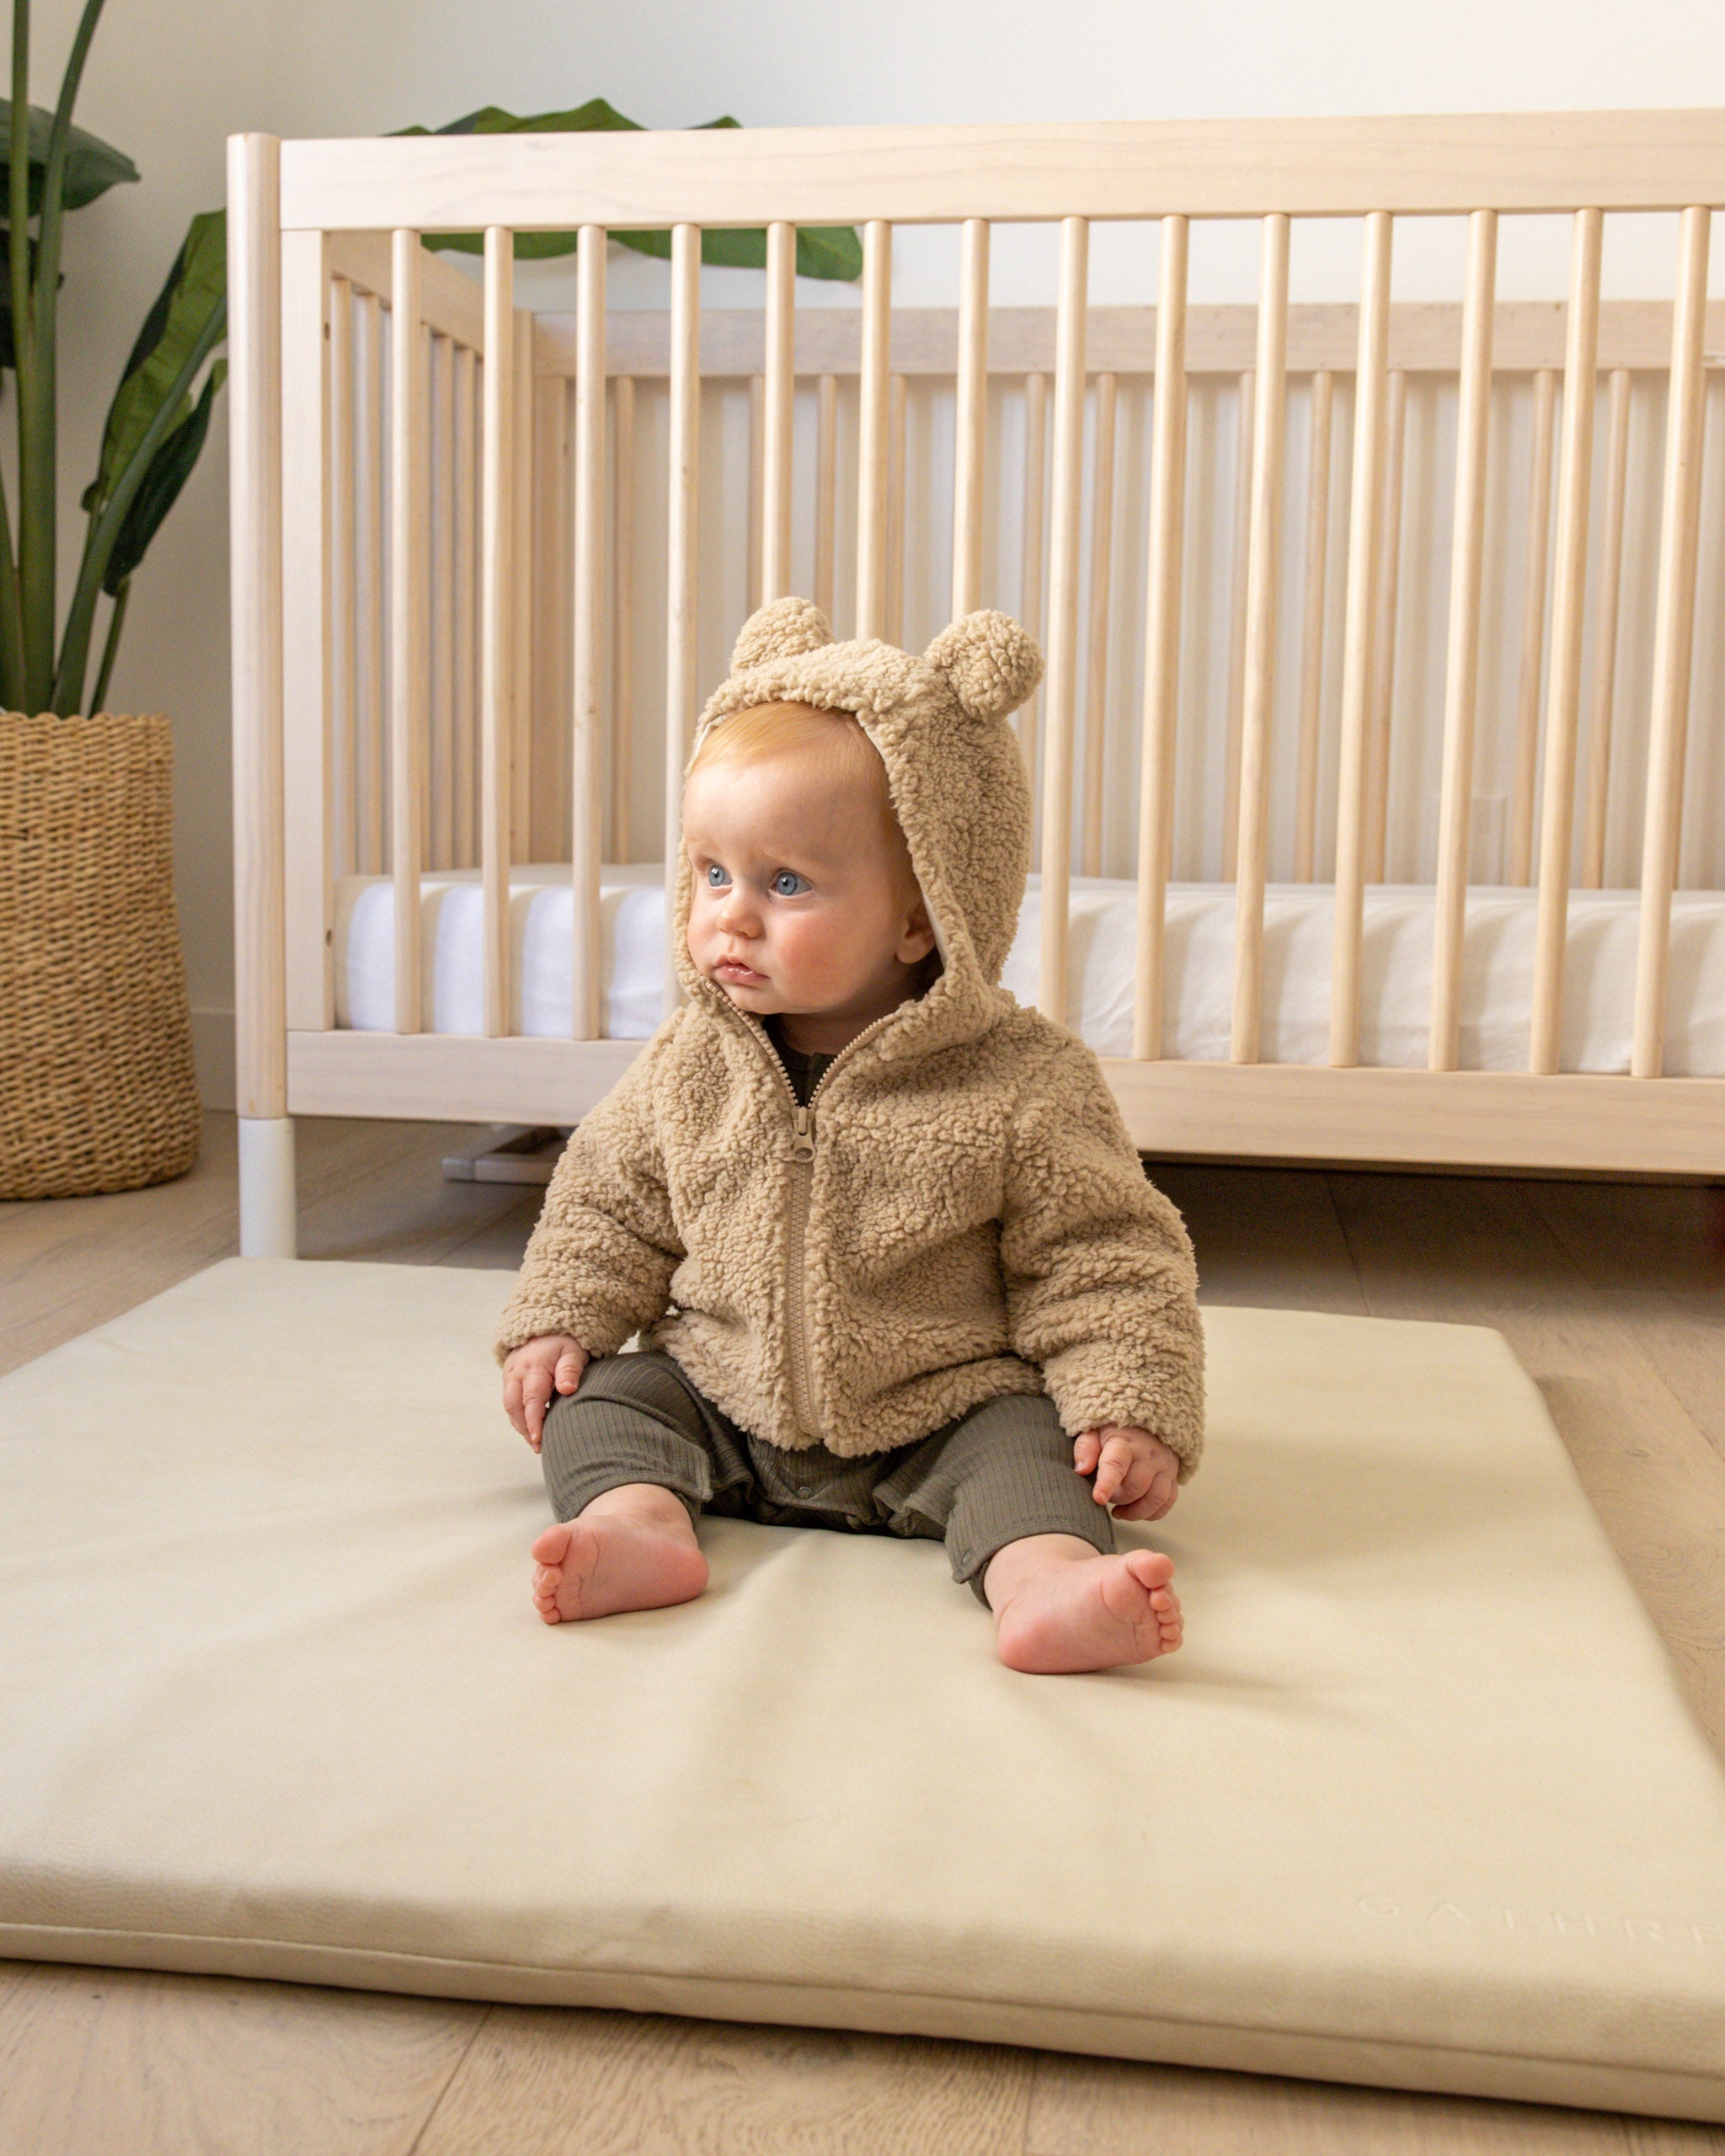 Bear Jacket || Sand - Rylee + Cru | Kids Clothes | Trendy Baby Clothes | Modern Infant Outfits |